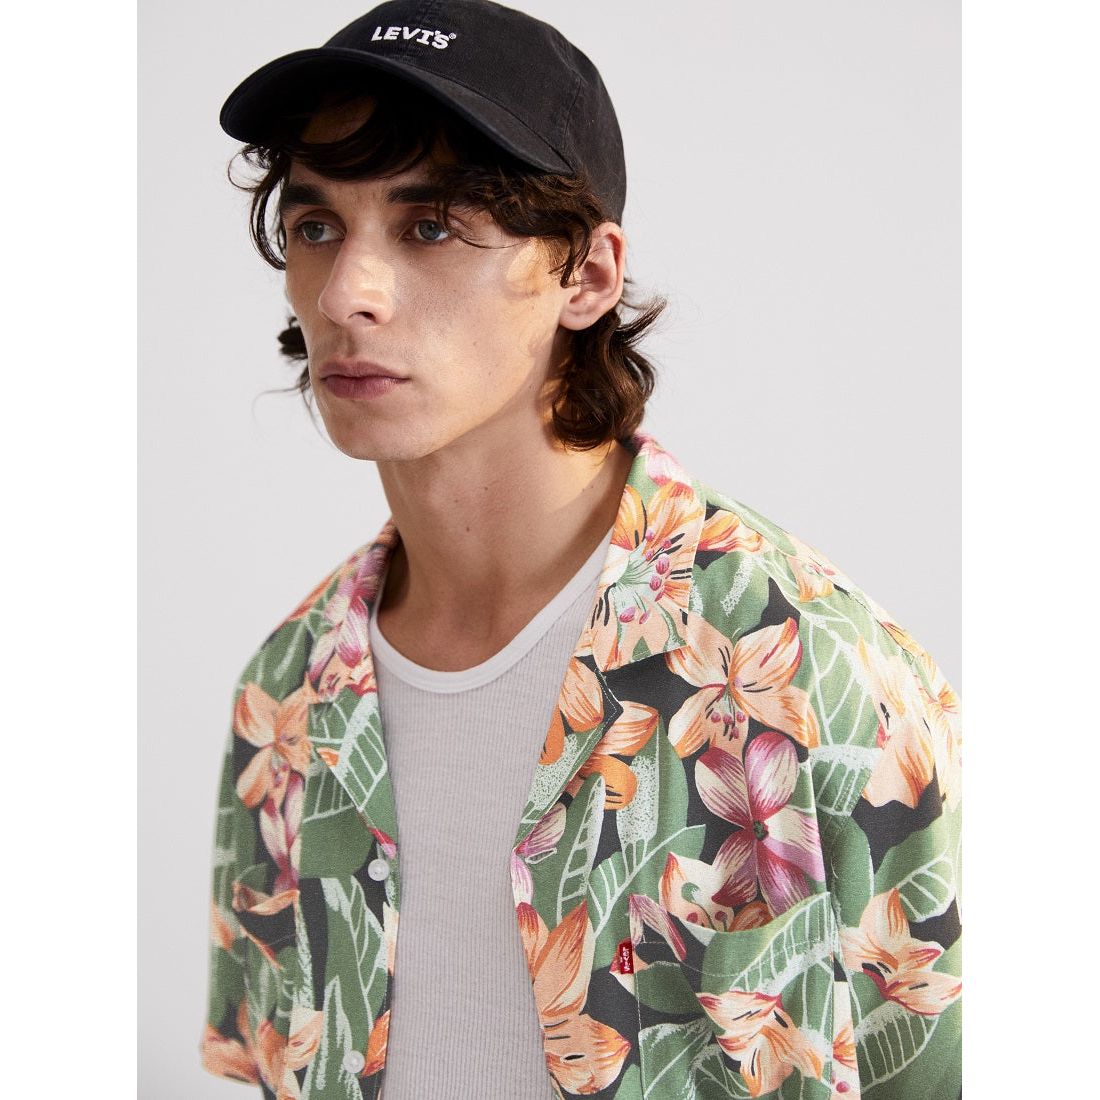 Levi's - Classic Camper Shirt in Andromede Tropical